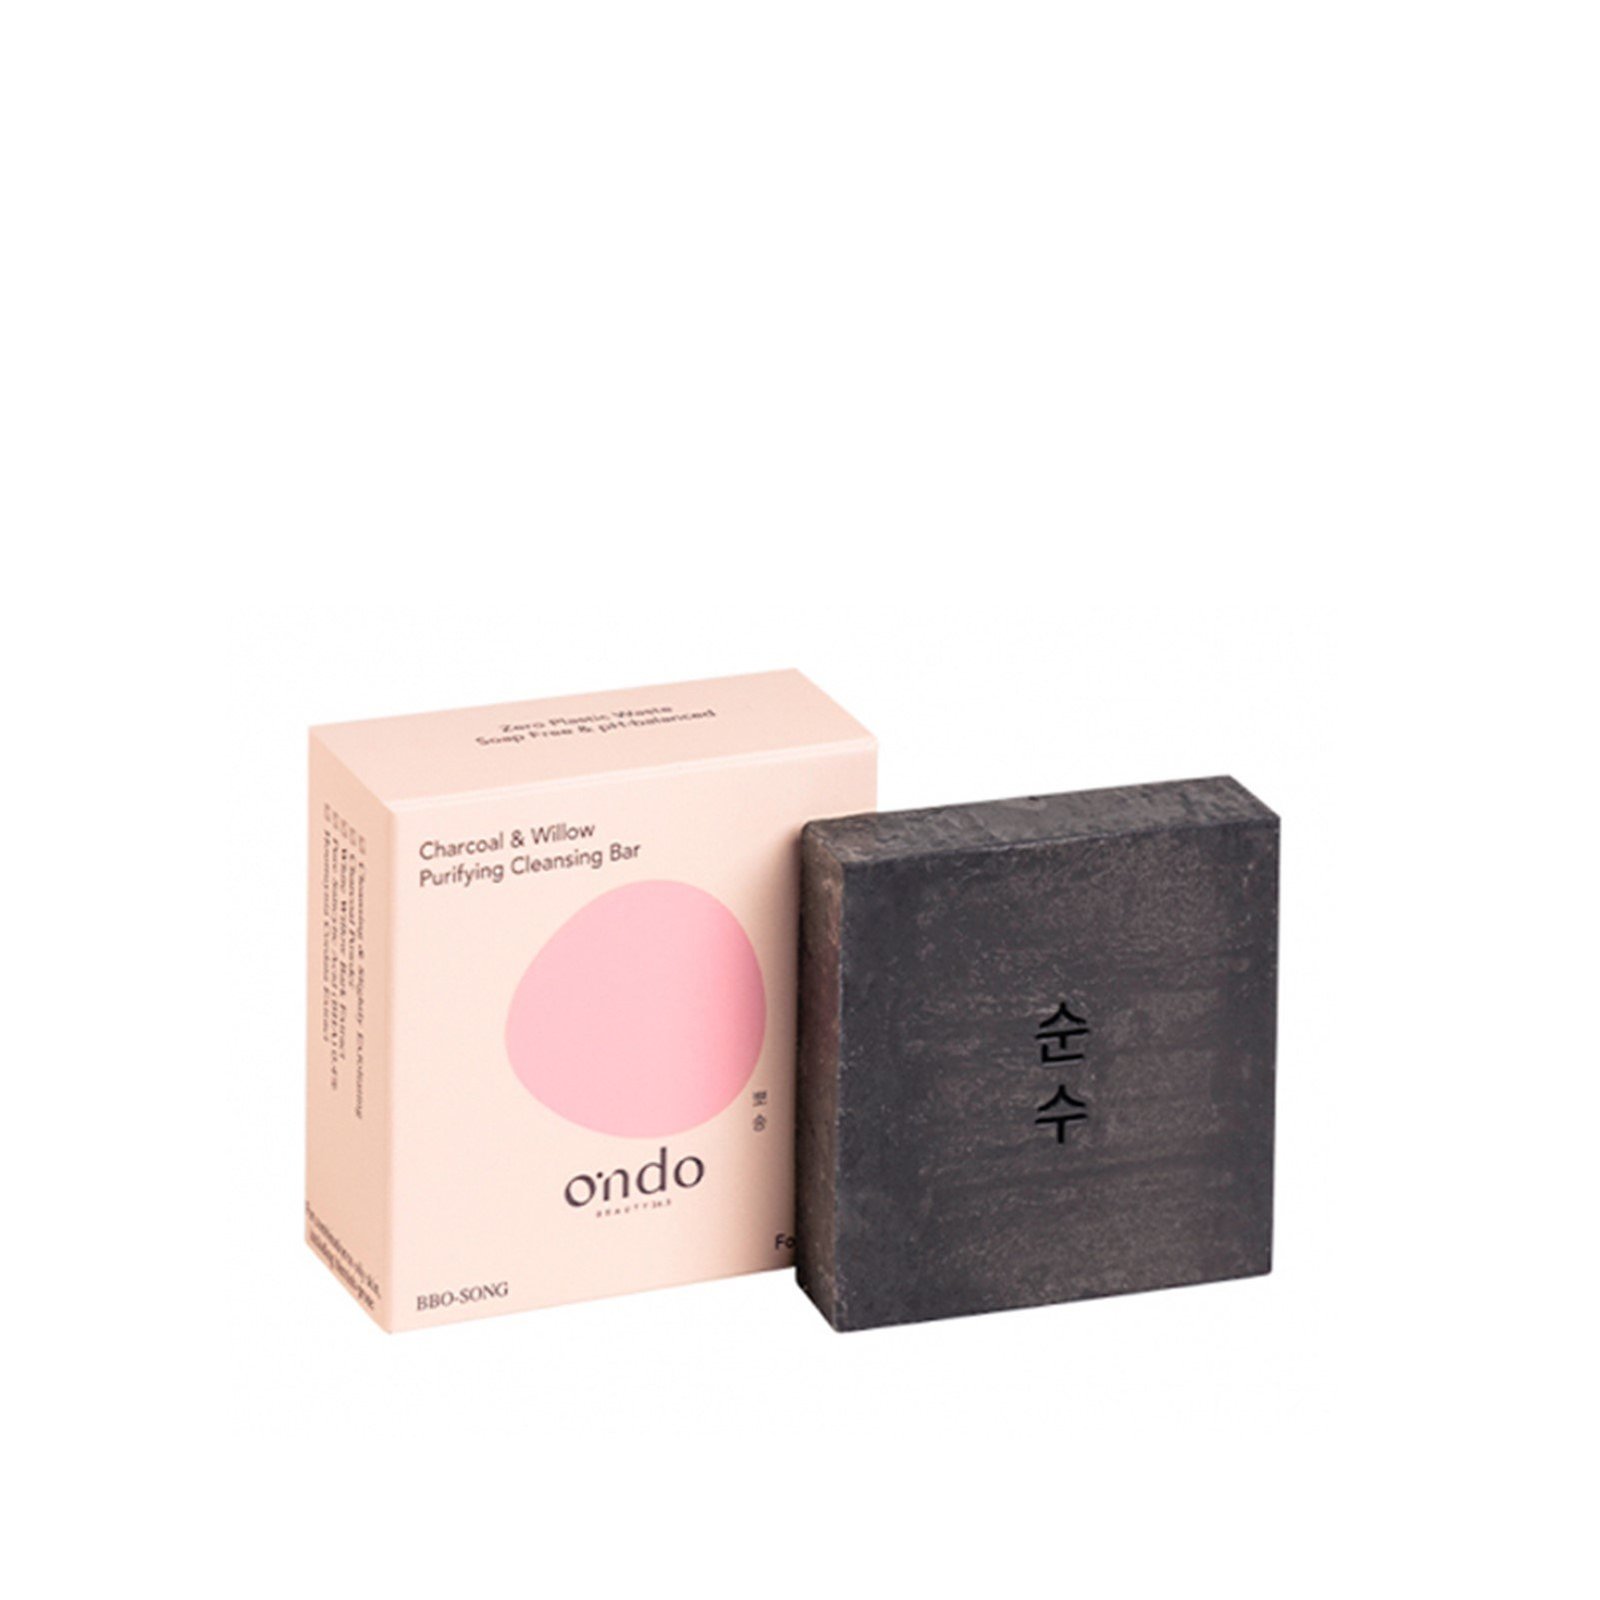 Ondo Beauty 36.5 Charcoal & Willow Purifying Cleansing Bar 70g